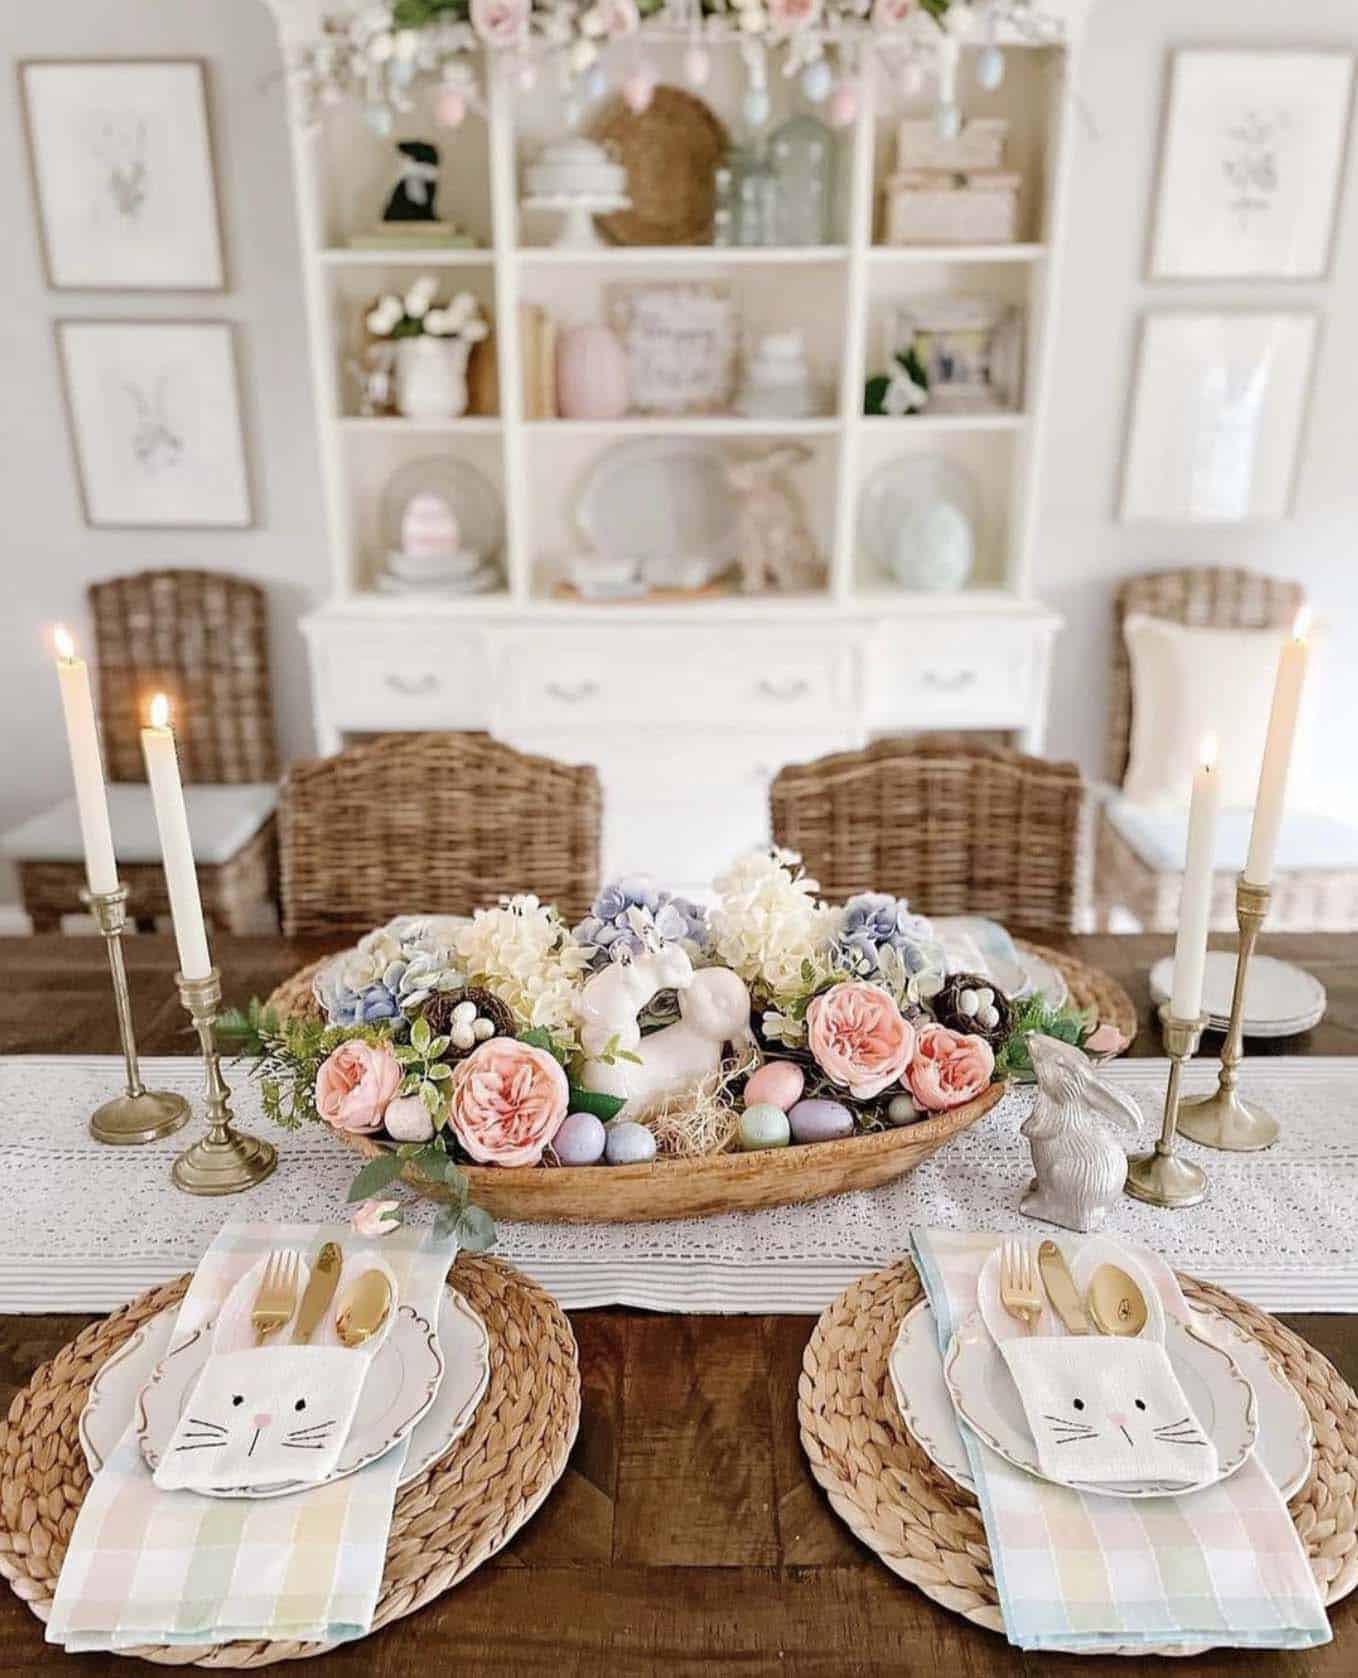 Easter dining table decorated with a dough bowl centerpiece